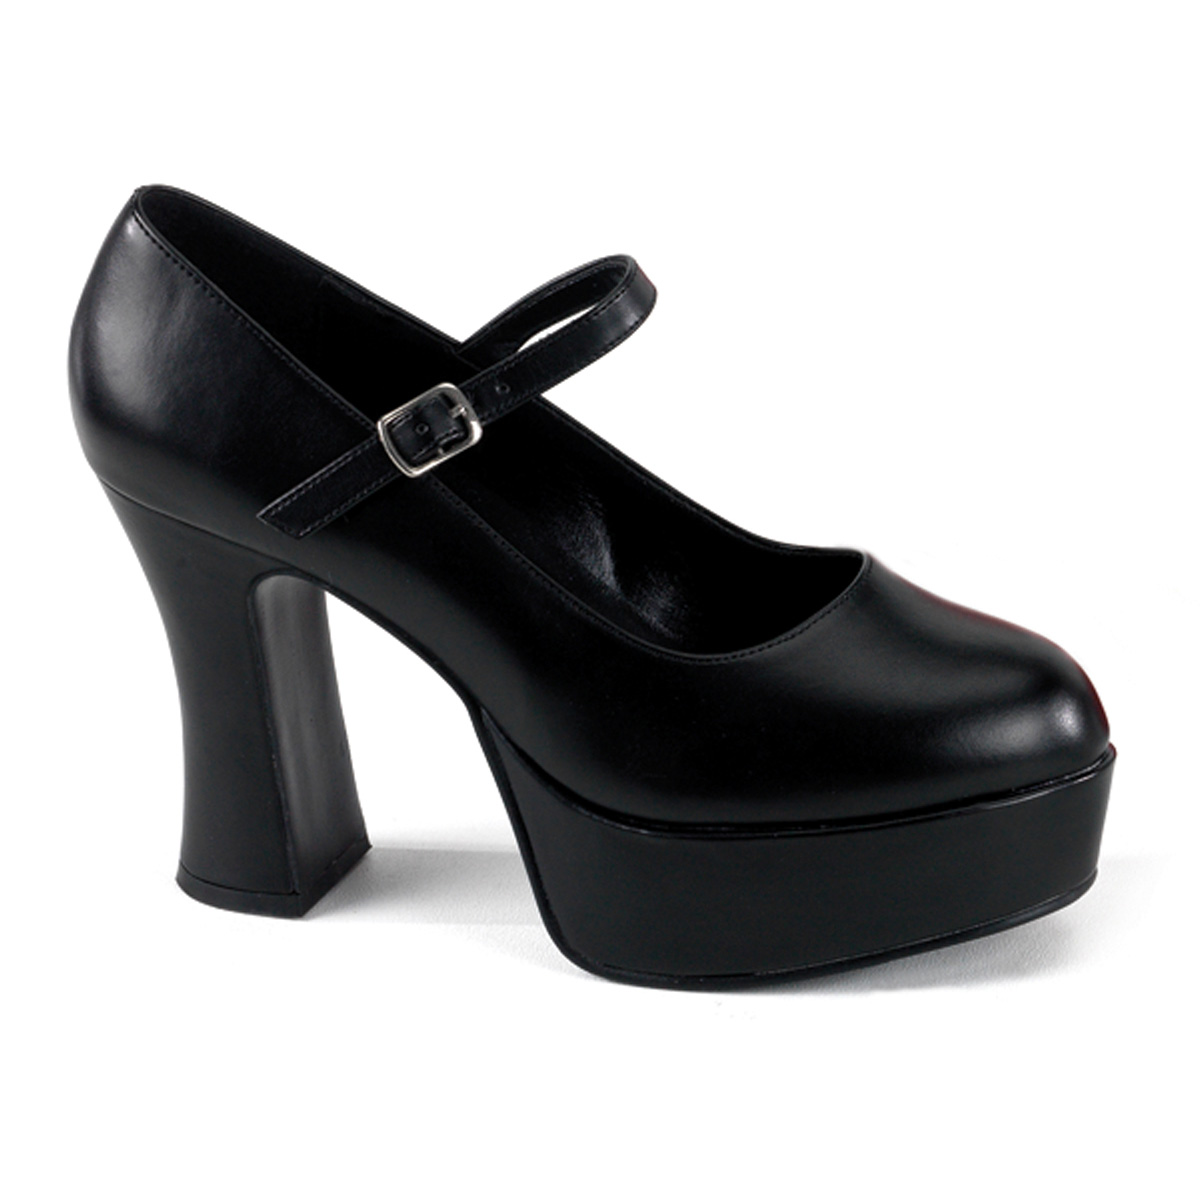 Black matte 4" Mary Jane costume shoes